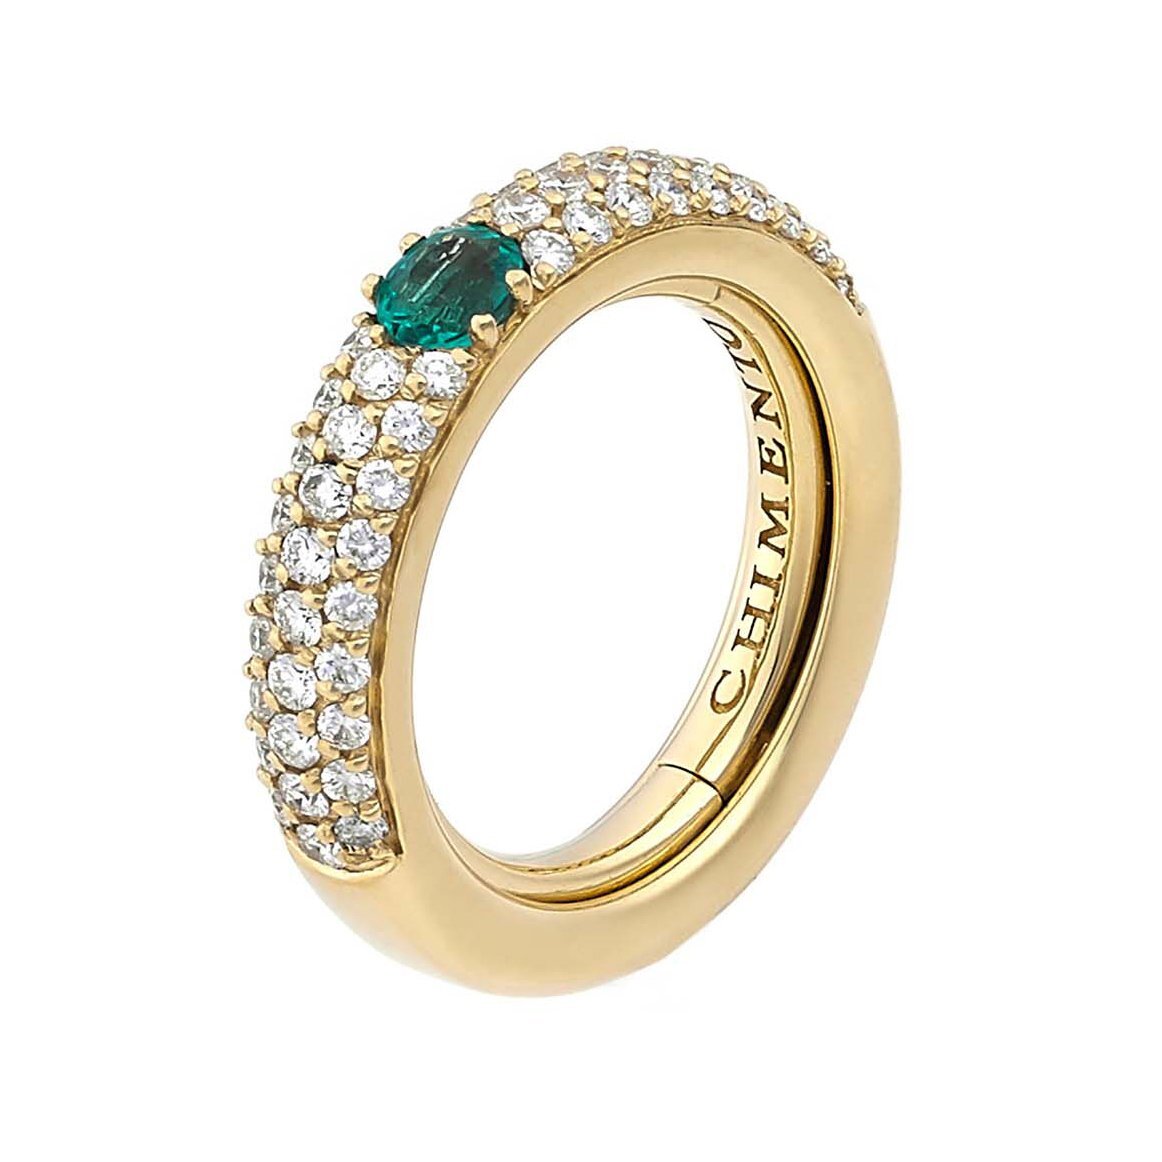 Chimento ring in yellow gold with diamonds and emerald 1AS1940EB1140